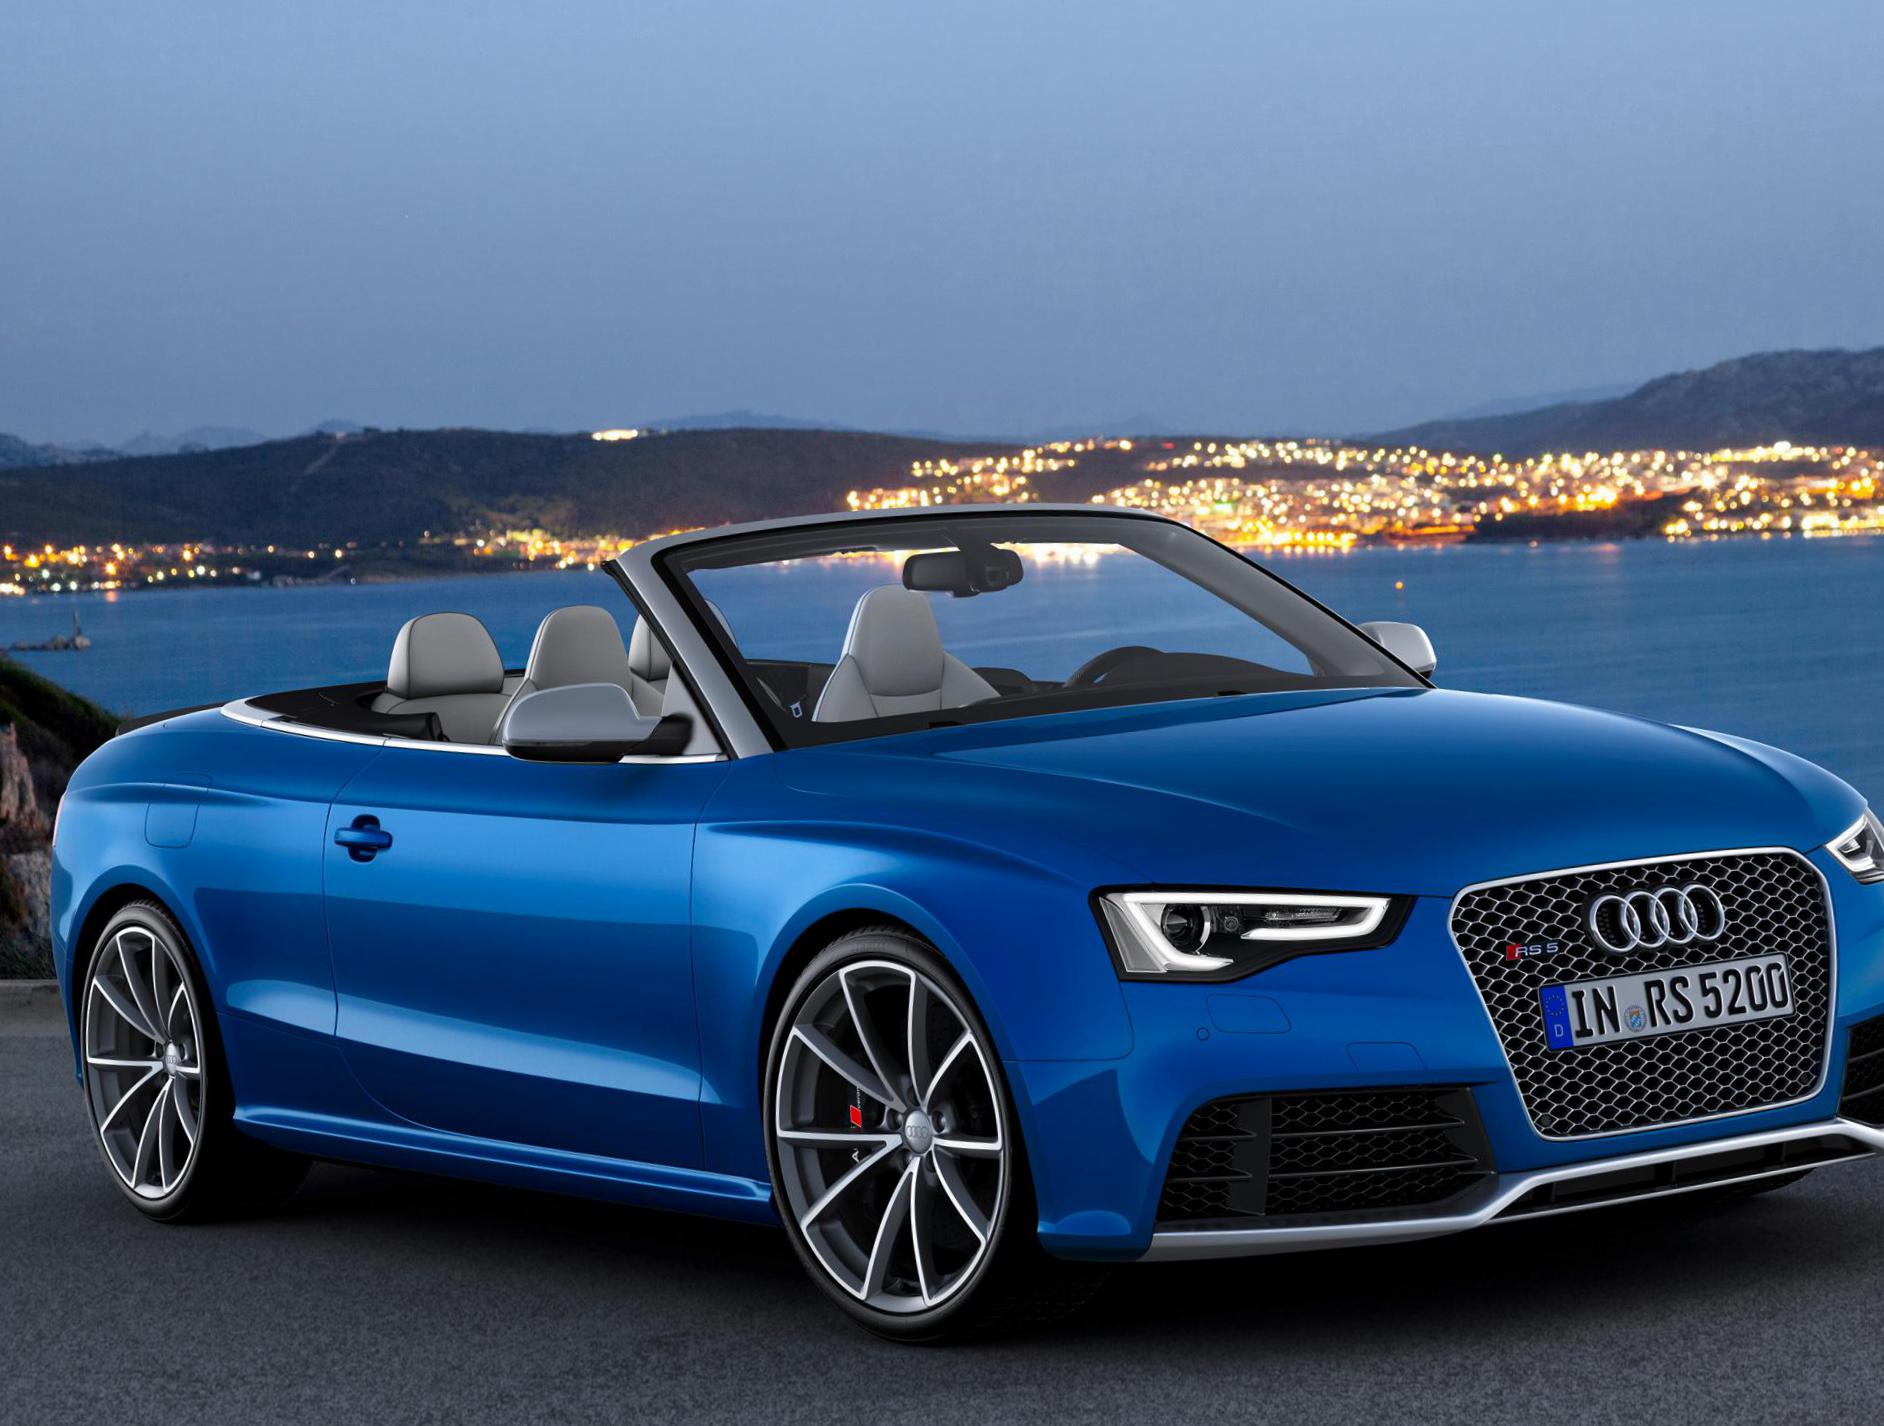 RS5 Cabriolet Audi tuning 2011